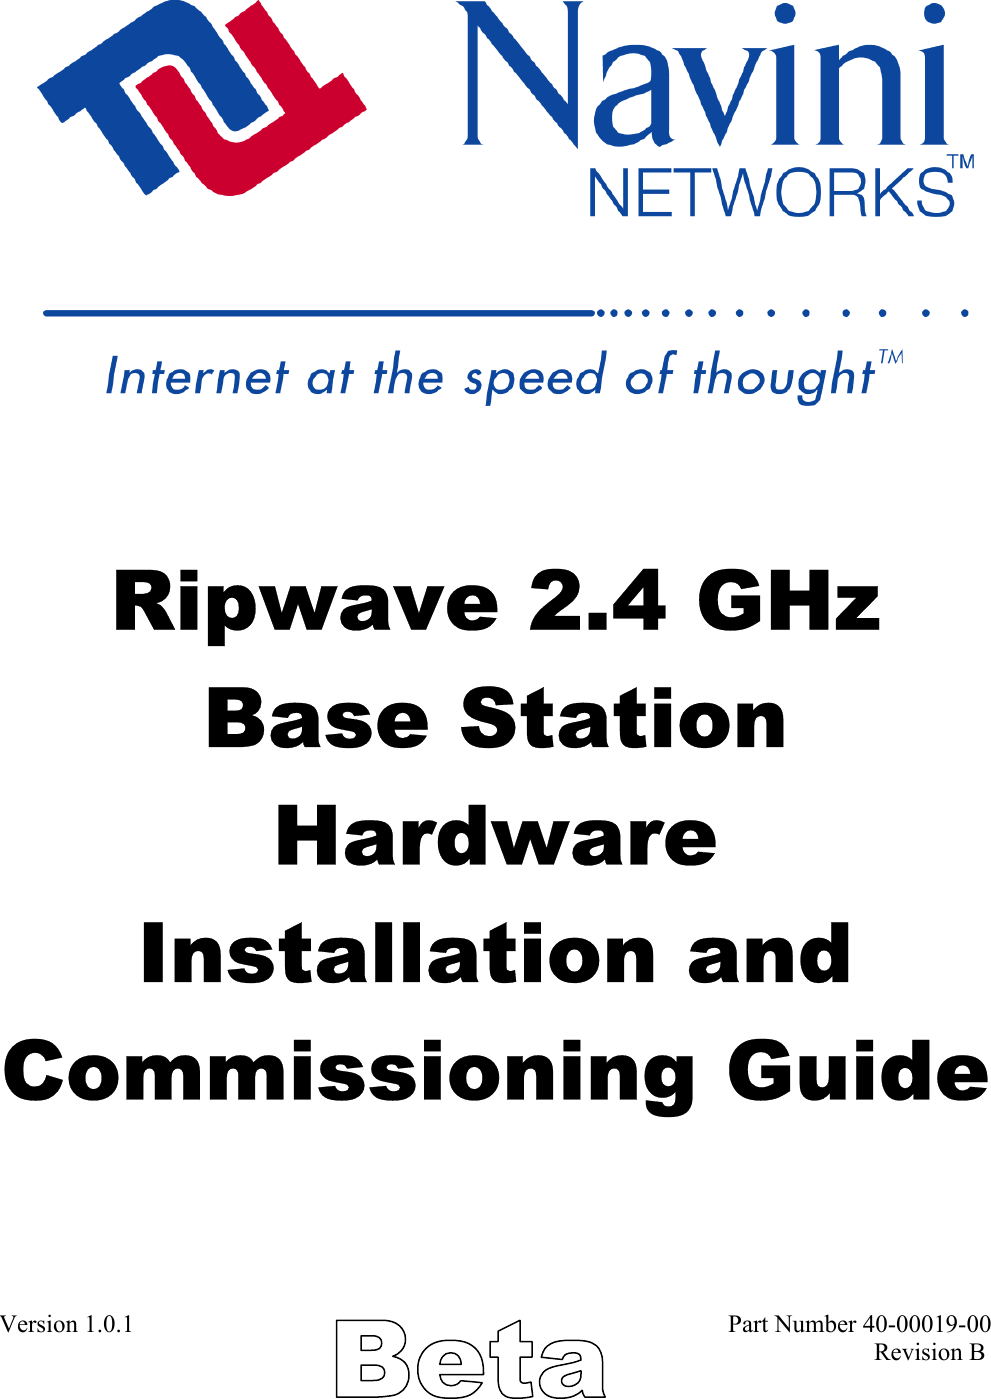            Ripwave 2.4 GHz  Base Station Hardware Installation and Commissioning Guide Version 1.0.1                                                                                               Part Number 40-00019-00                                                                                                                                             Revision B 